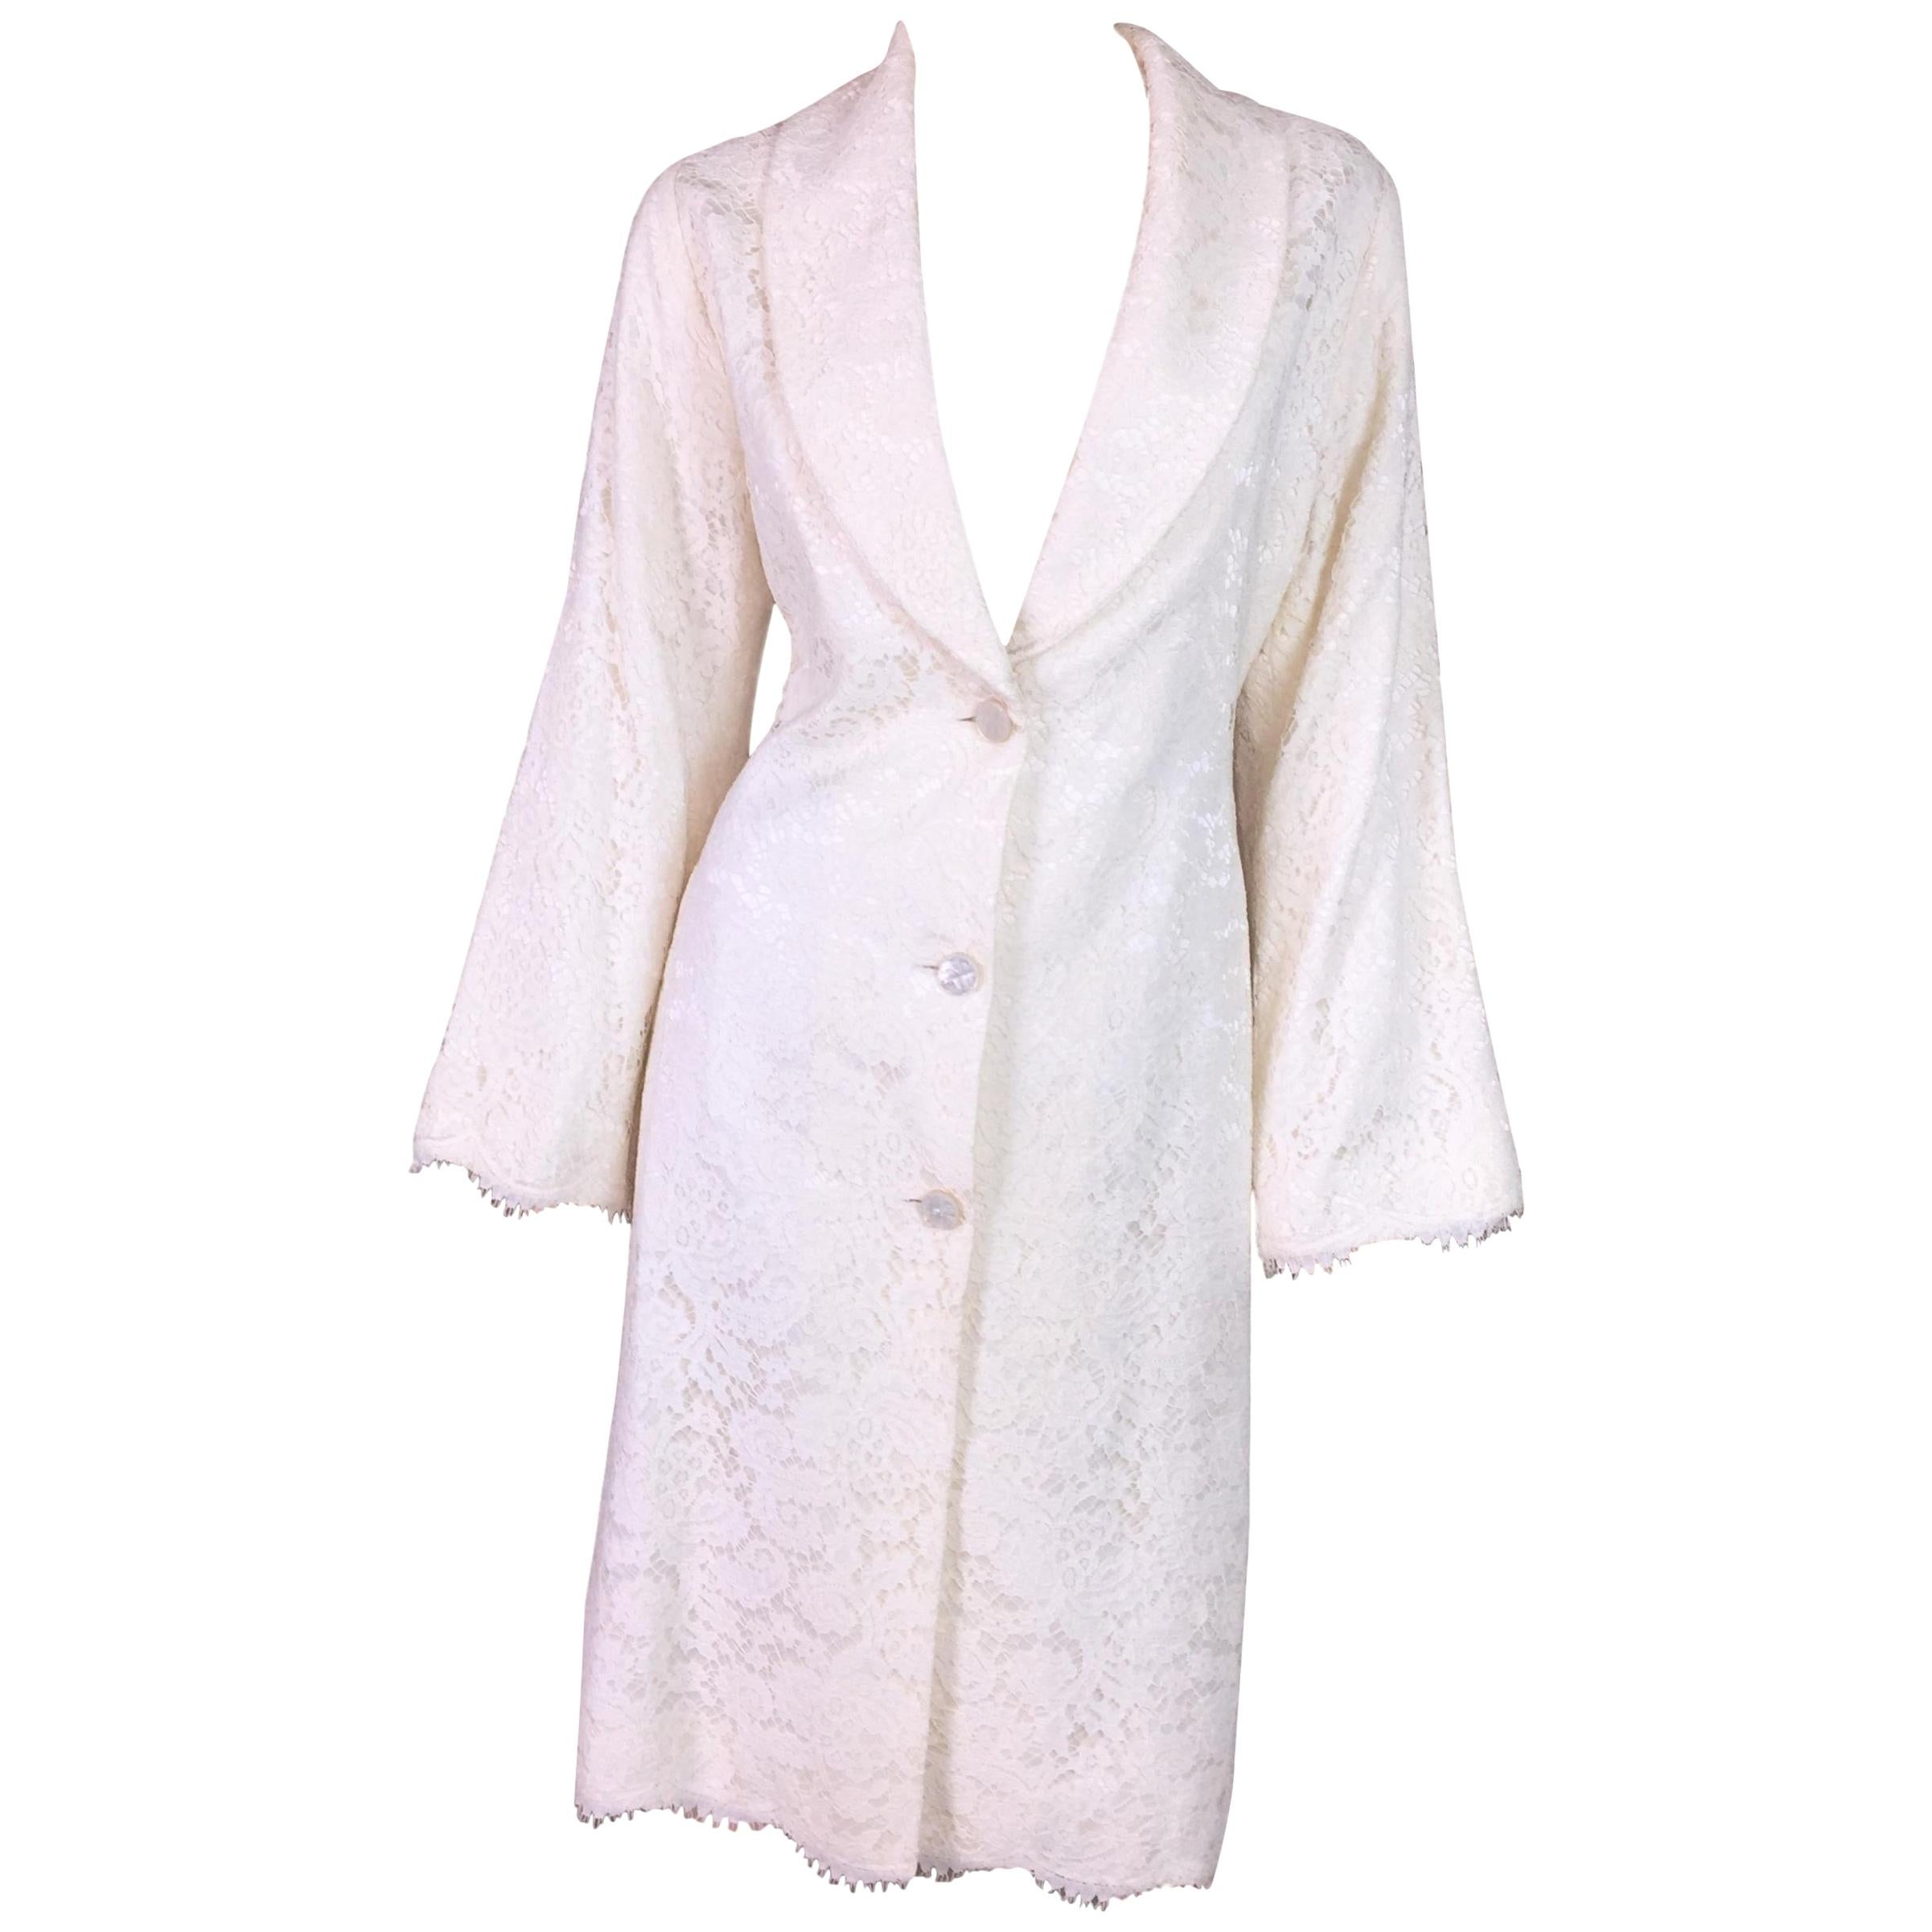 Circa 1999 Givenchy Couture by Alexander McQueen Ivory Lace Princess Dress Coat